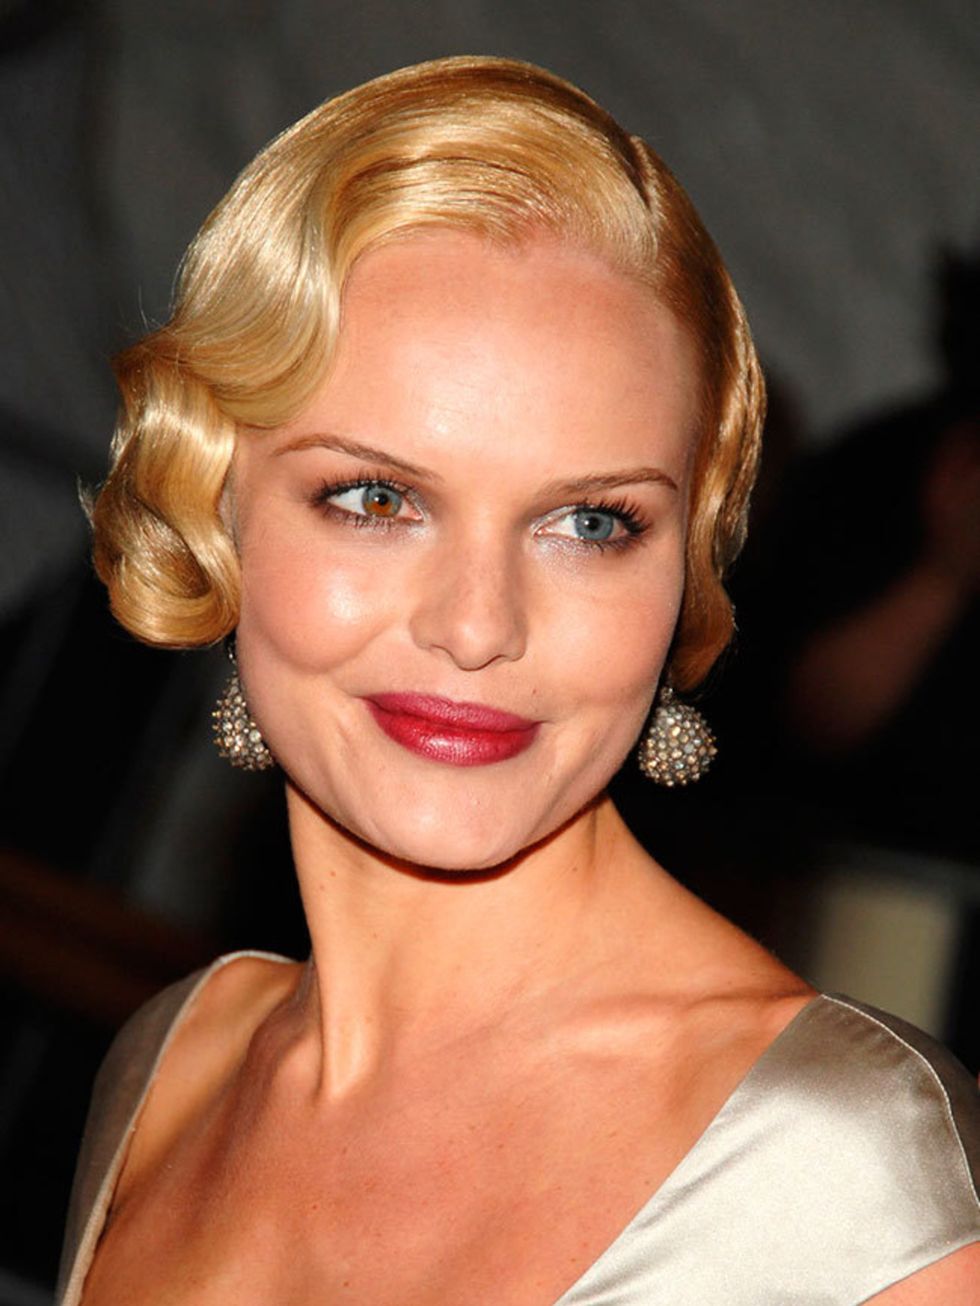 <p><a href="http://www.elleuk.com/star-style/celebrity-style-files/kate-bosworth-style-icons-best-dressed-moments">Kate Bosworth</a> goes all-out 1920s with her waved updo and stained wine lip. Notice how the lip has a worn-in feel? Recreate this with blo